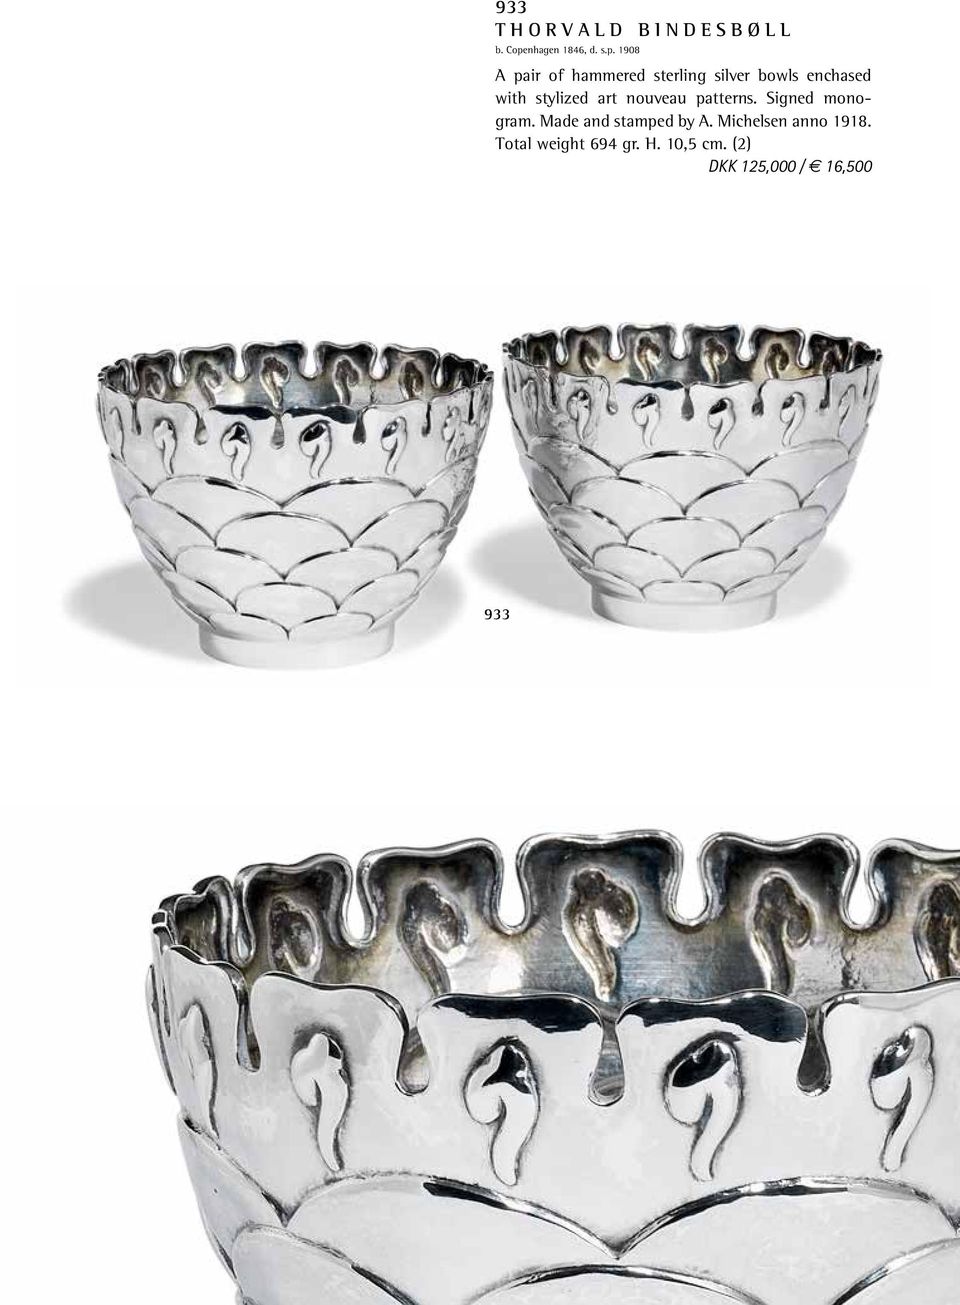 1908 A pair of hammered sterling silver bowls enchased with stylized art